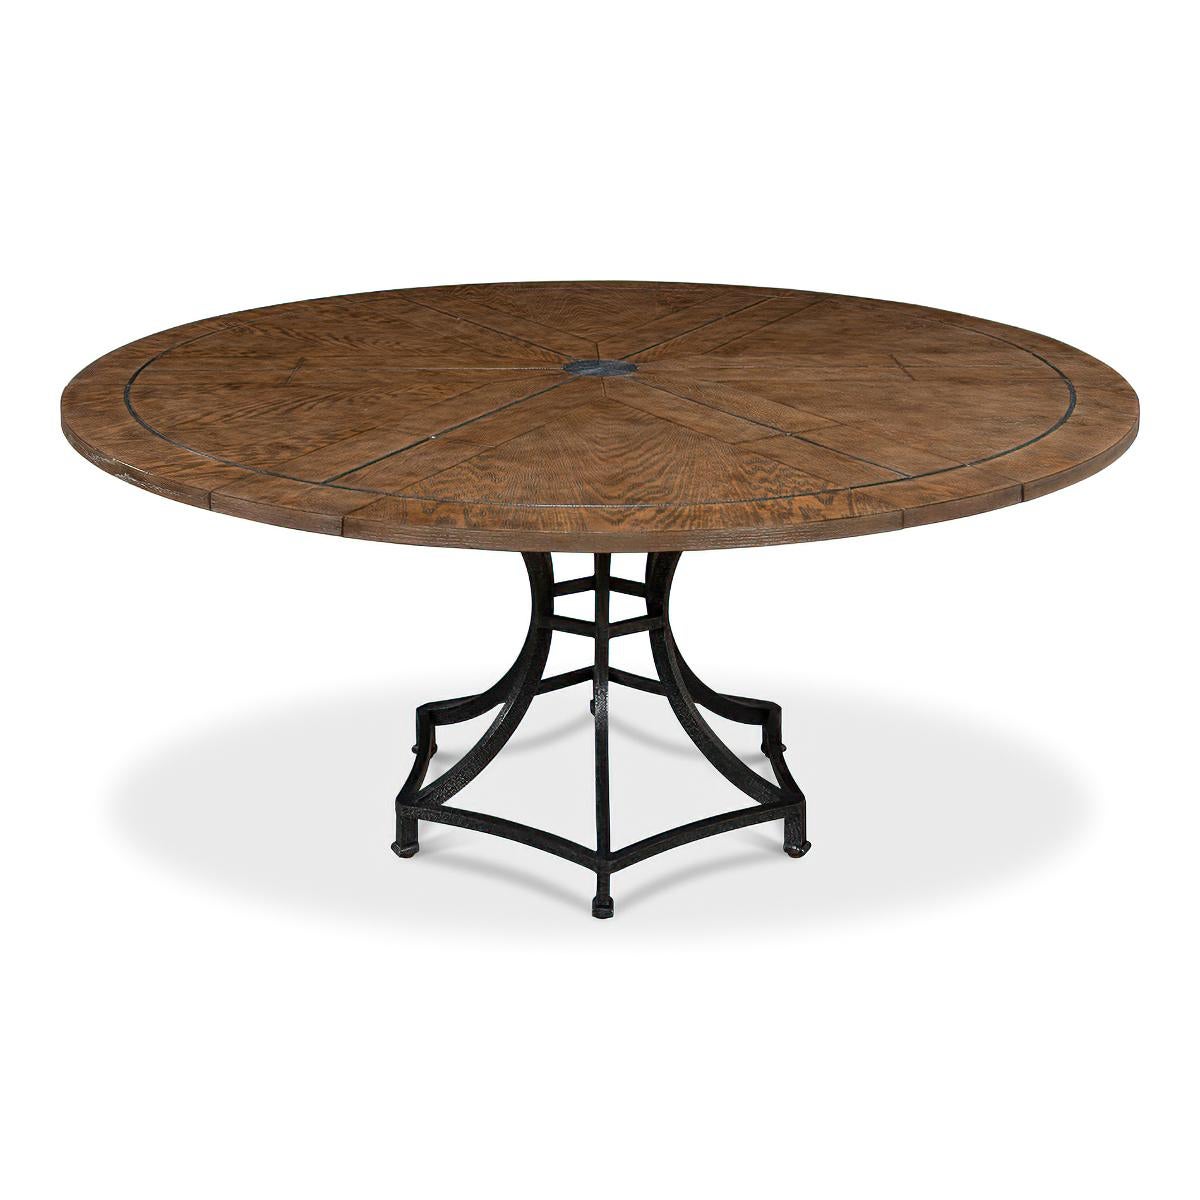 Modern Industrial Round Dining Table - Oak In New Condition For Sale In Westwood, NJ